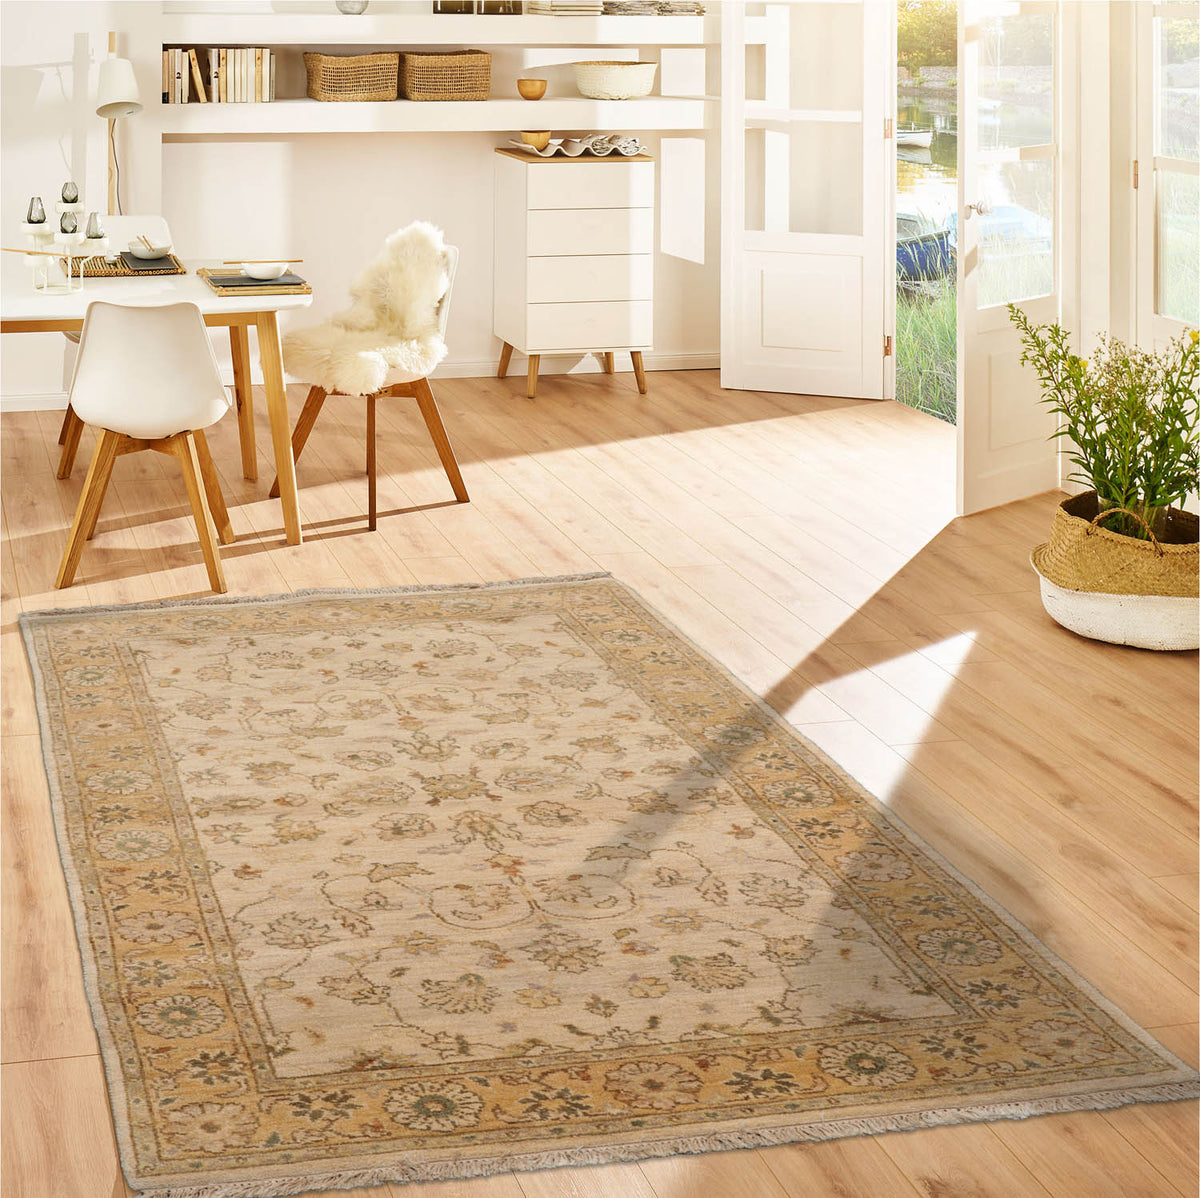 Koepke 3x5 Beige, Tan Hand Knotted 100% Wool Agra Traditional Oriental Area Rug